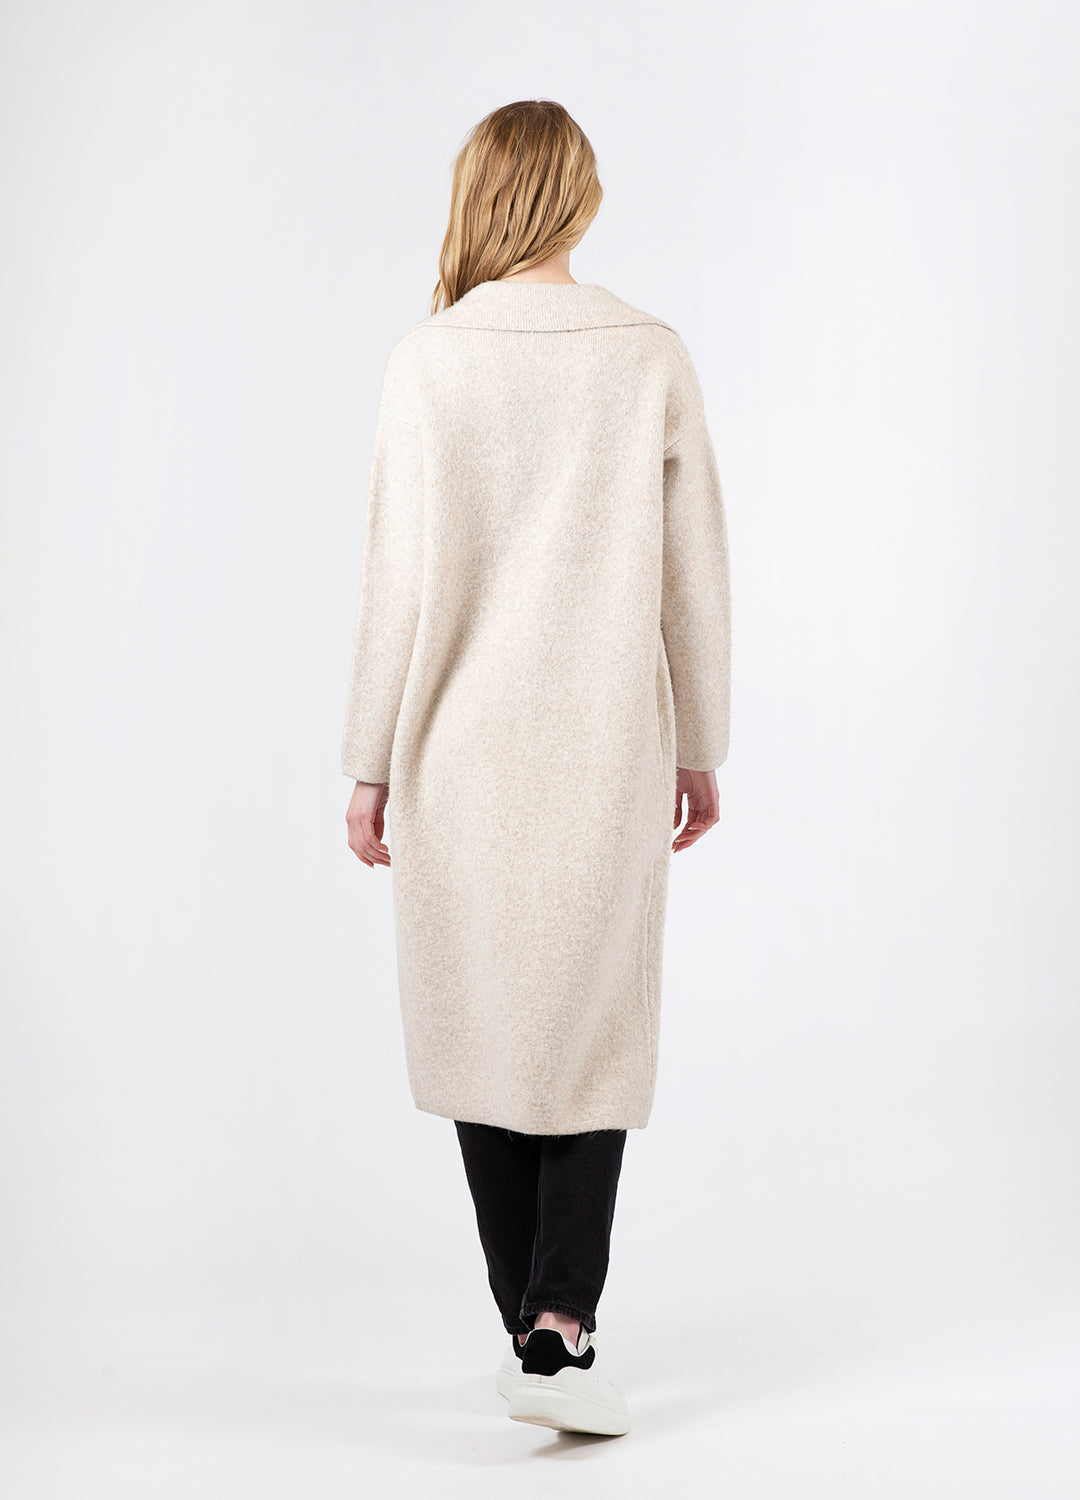 Lyla + Luxe knitwear Jimmi Long Sweater in beige colour at Inner Beach Co, Toronto, Ontario, Canada